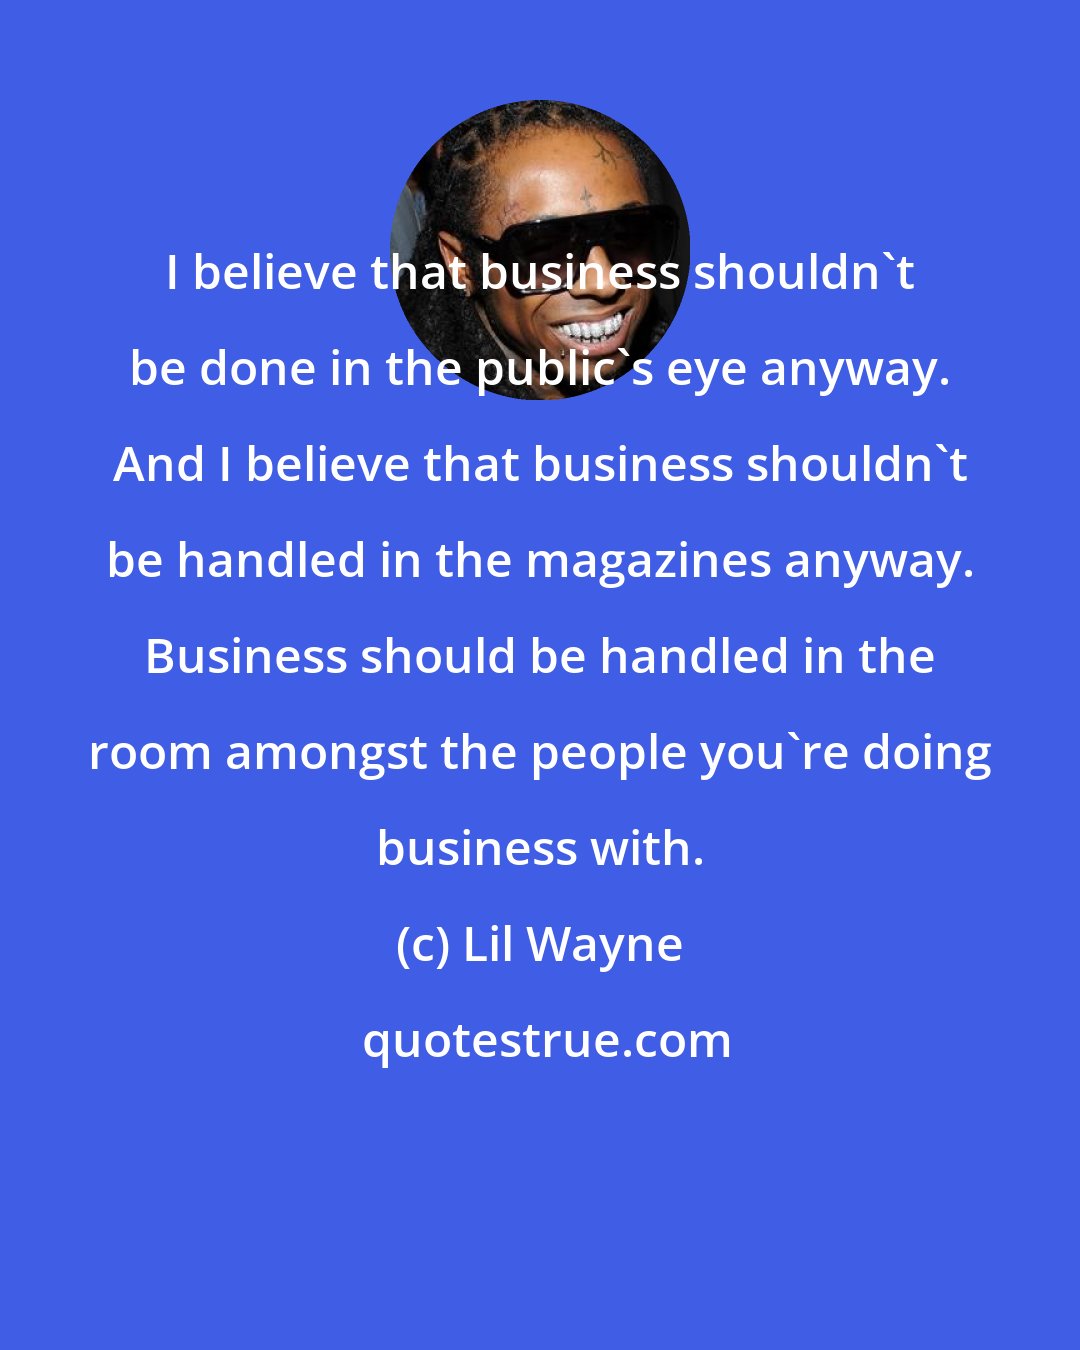 Lil Wayne: I believe that business shouldn't be done in the public's eye anyway. And I believe that business shouldn't be handled in the magazines anyway. Business should be handled in the room amongst the people you're doing business with.